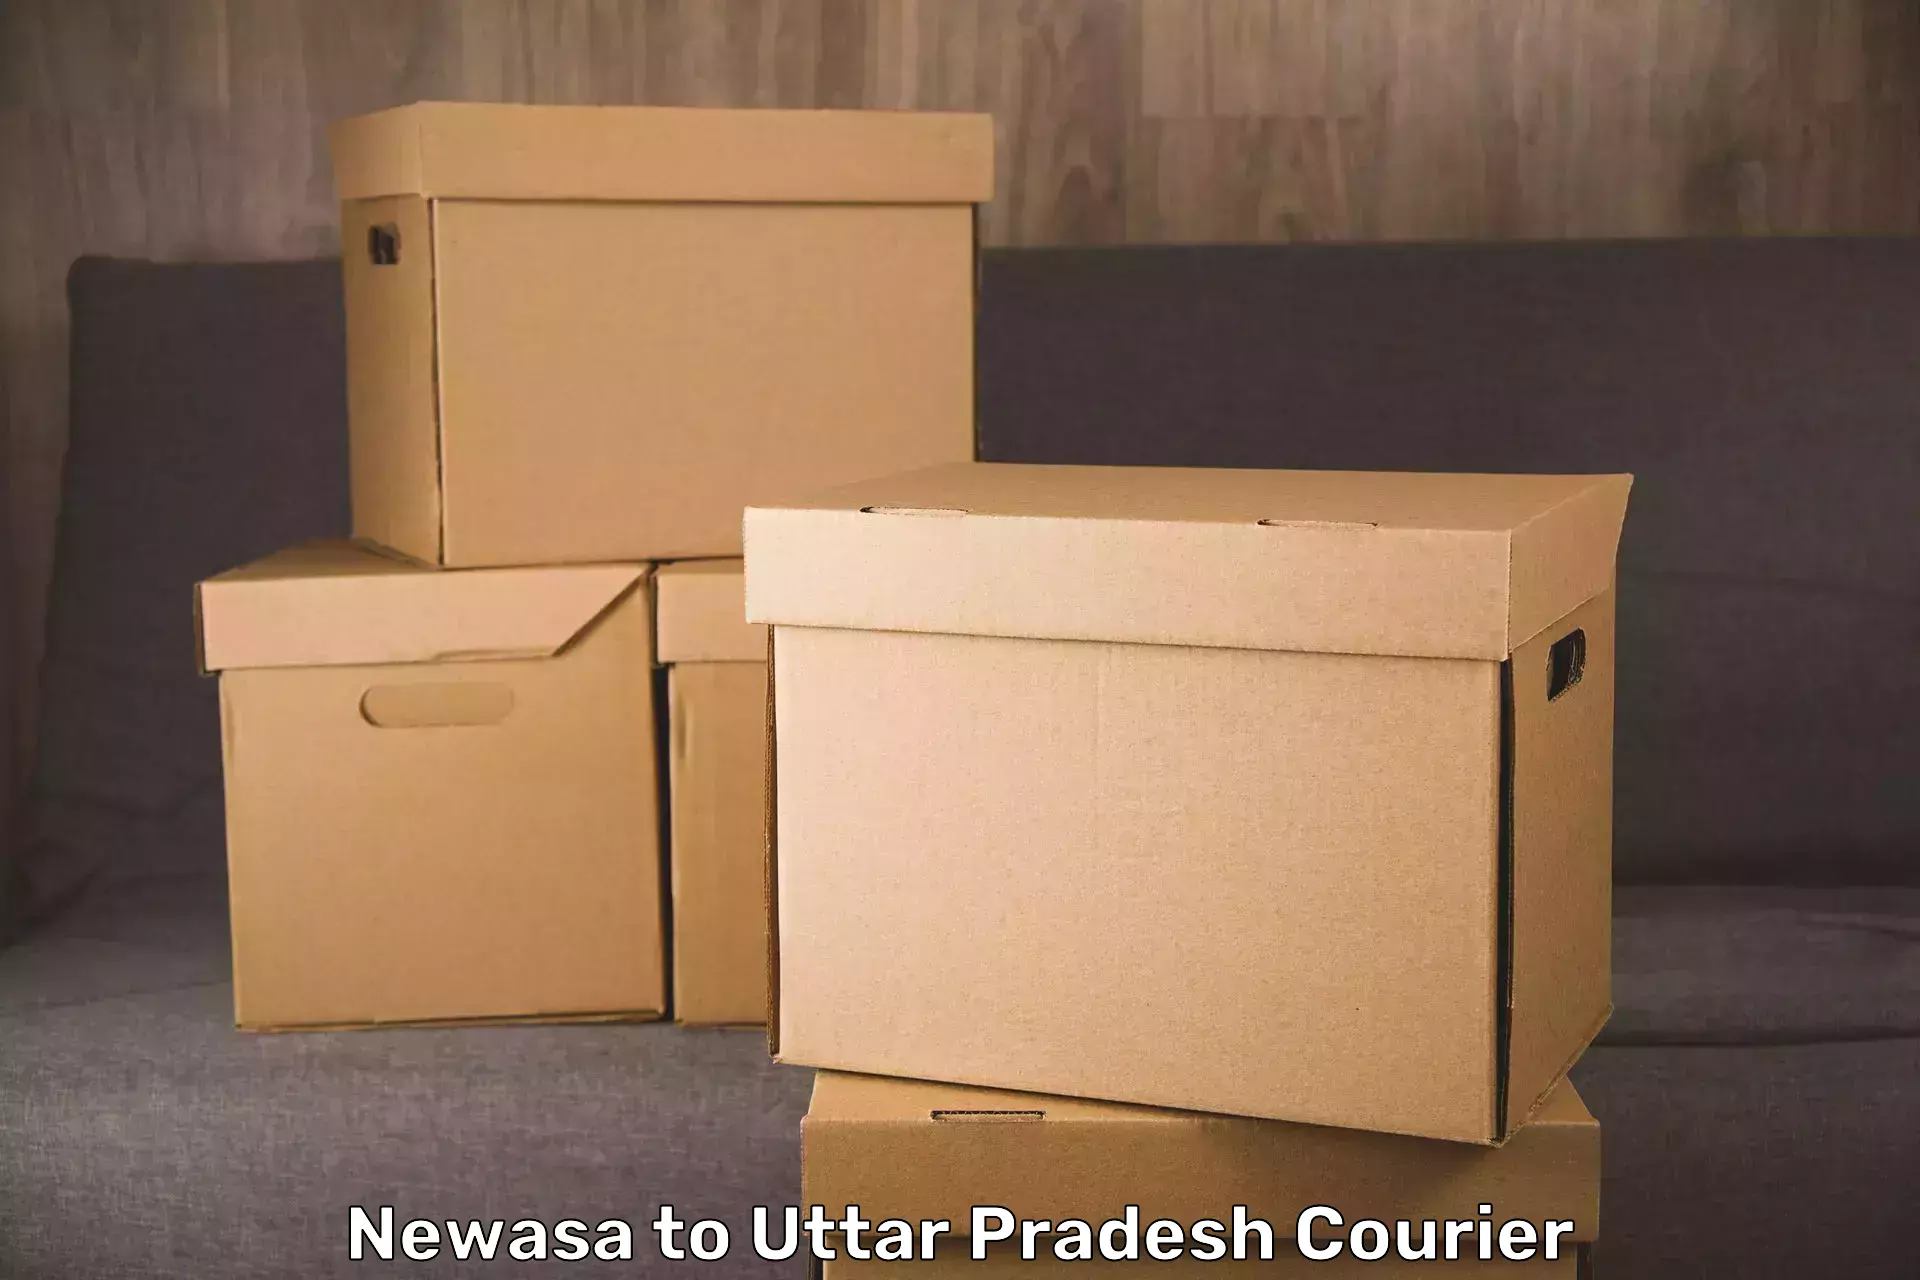 Personal effects shipping Newasa to Agra